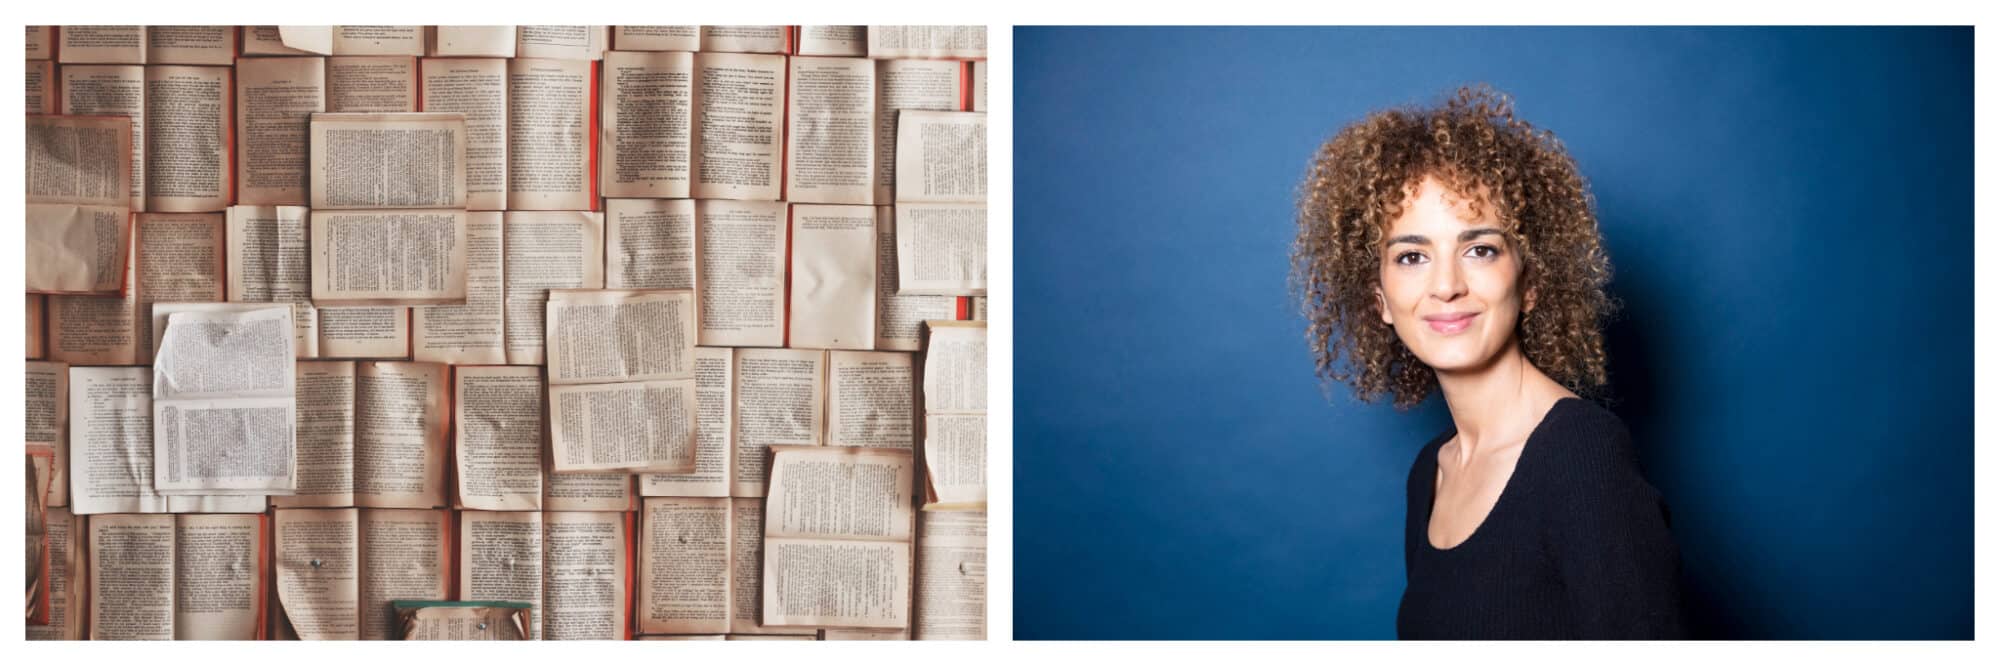 Left: Numerous books are opened and laid atop one another, Right: Leila Slimani stands in a long black sleeve shirt in front of a blue background